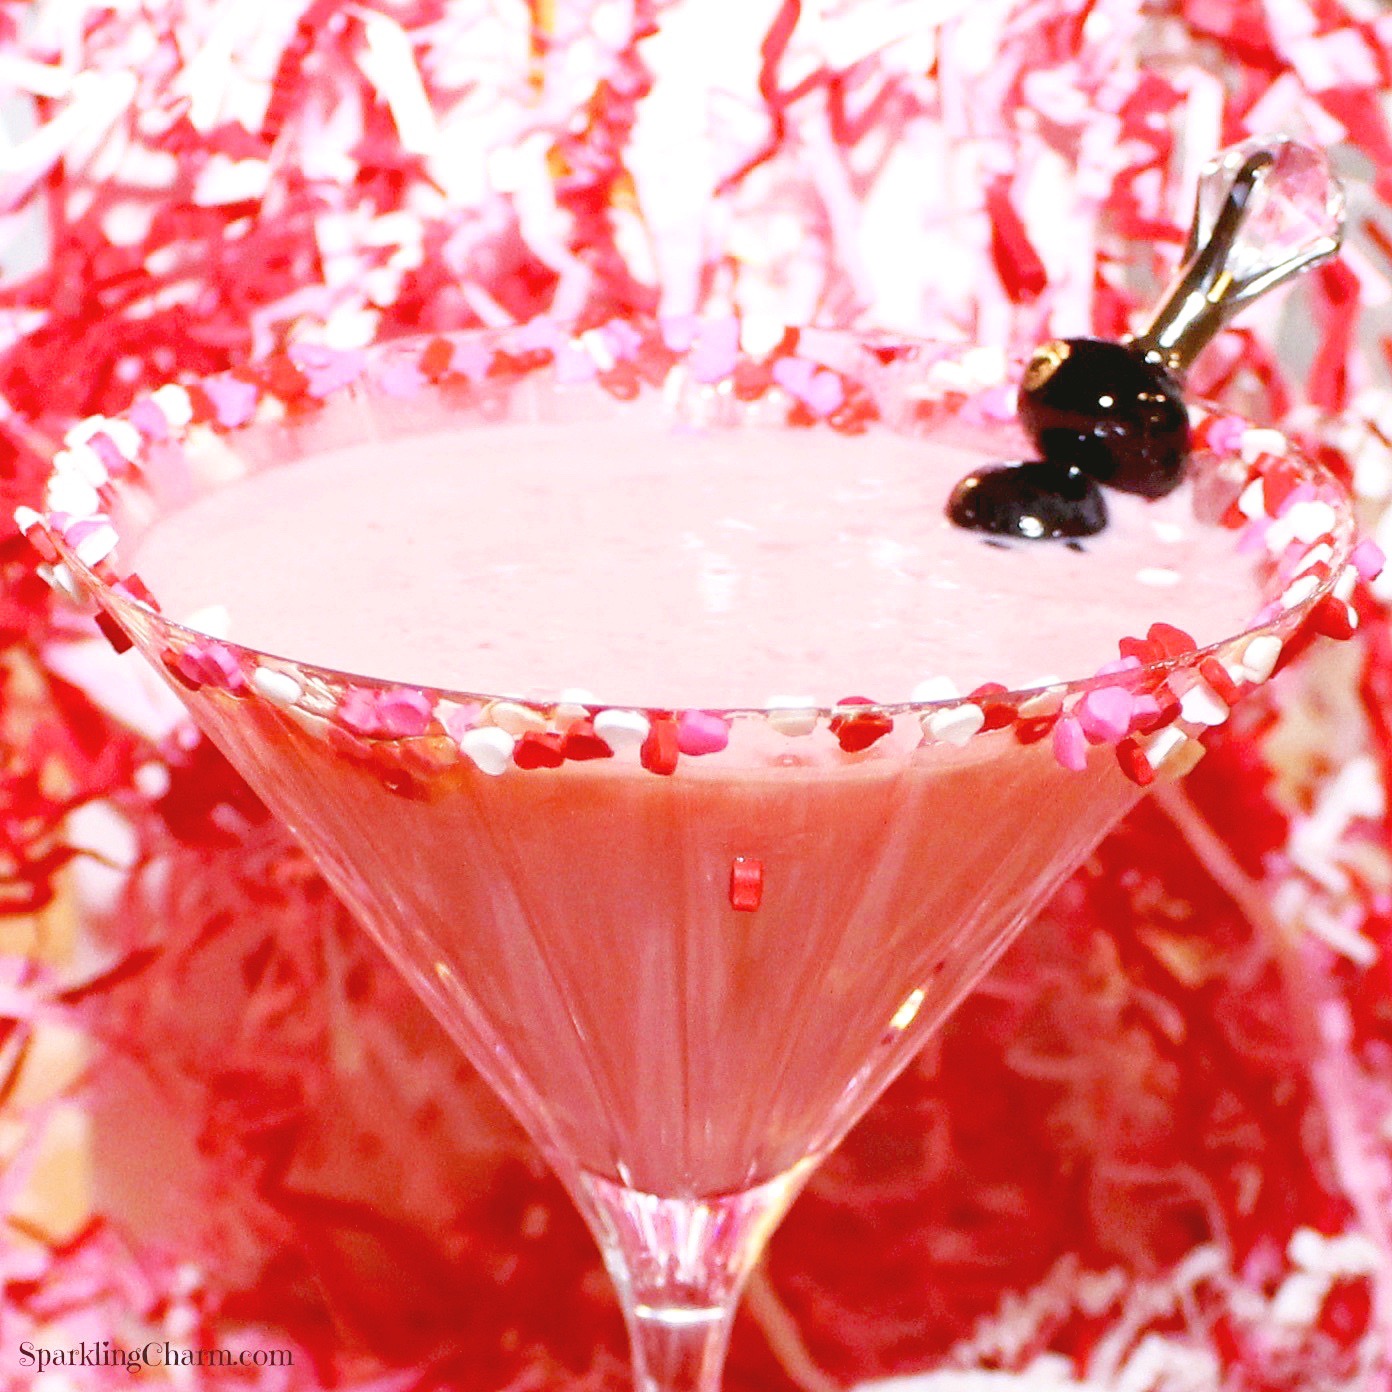 How to Make A “Sweetie Martini”